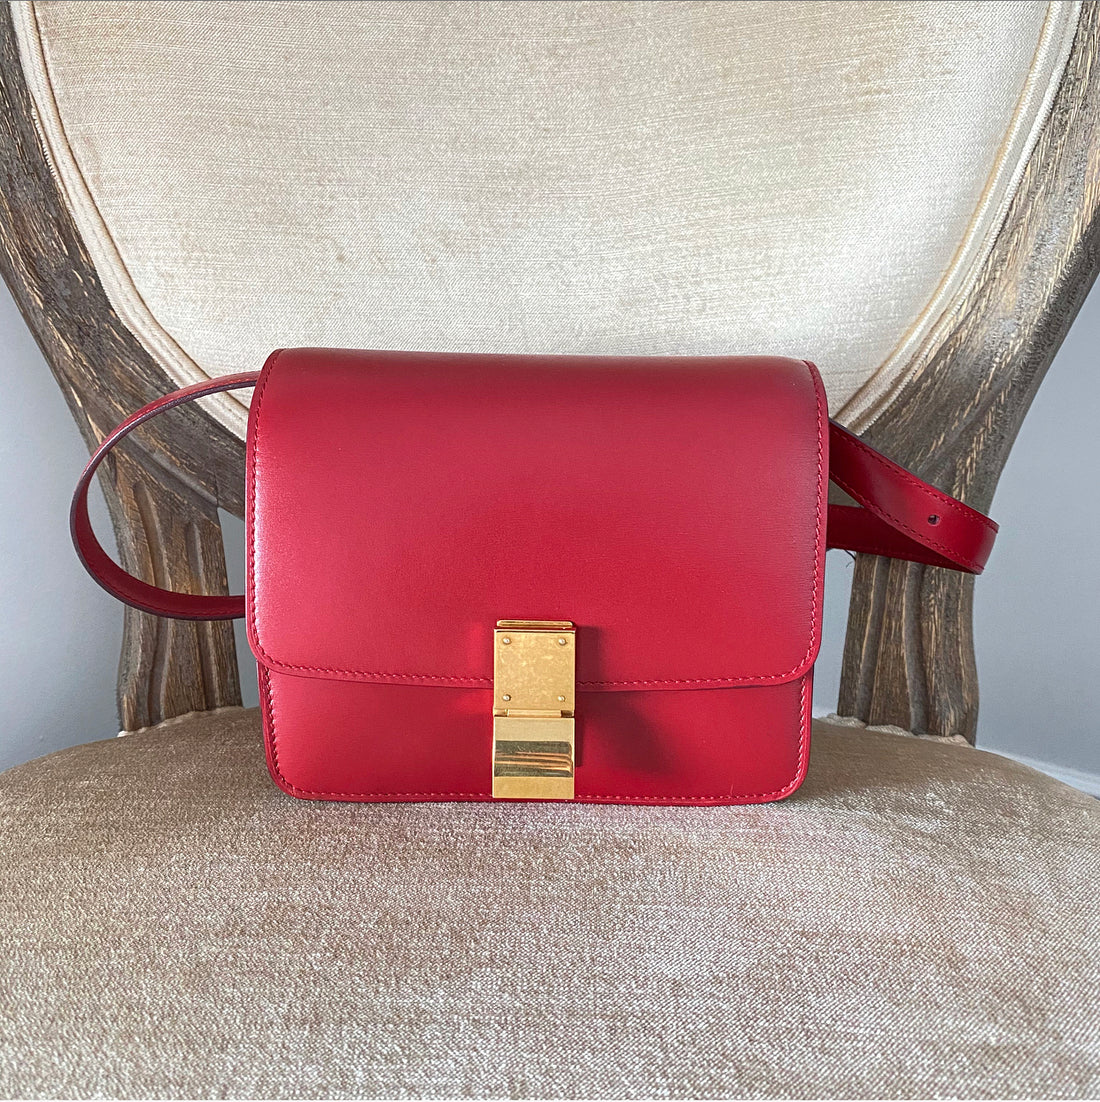 Celine Small Classic Red Leather Box Bag – I MISS YOU VINTAGE